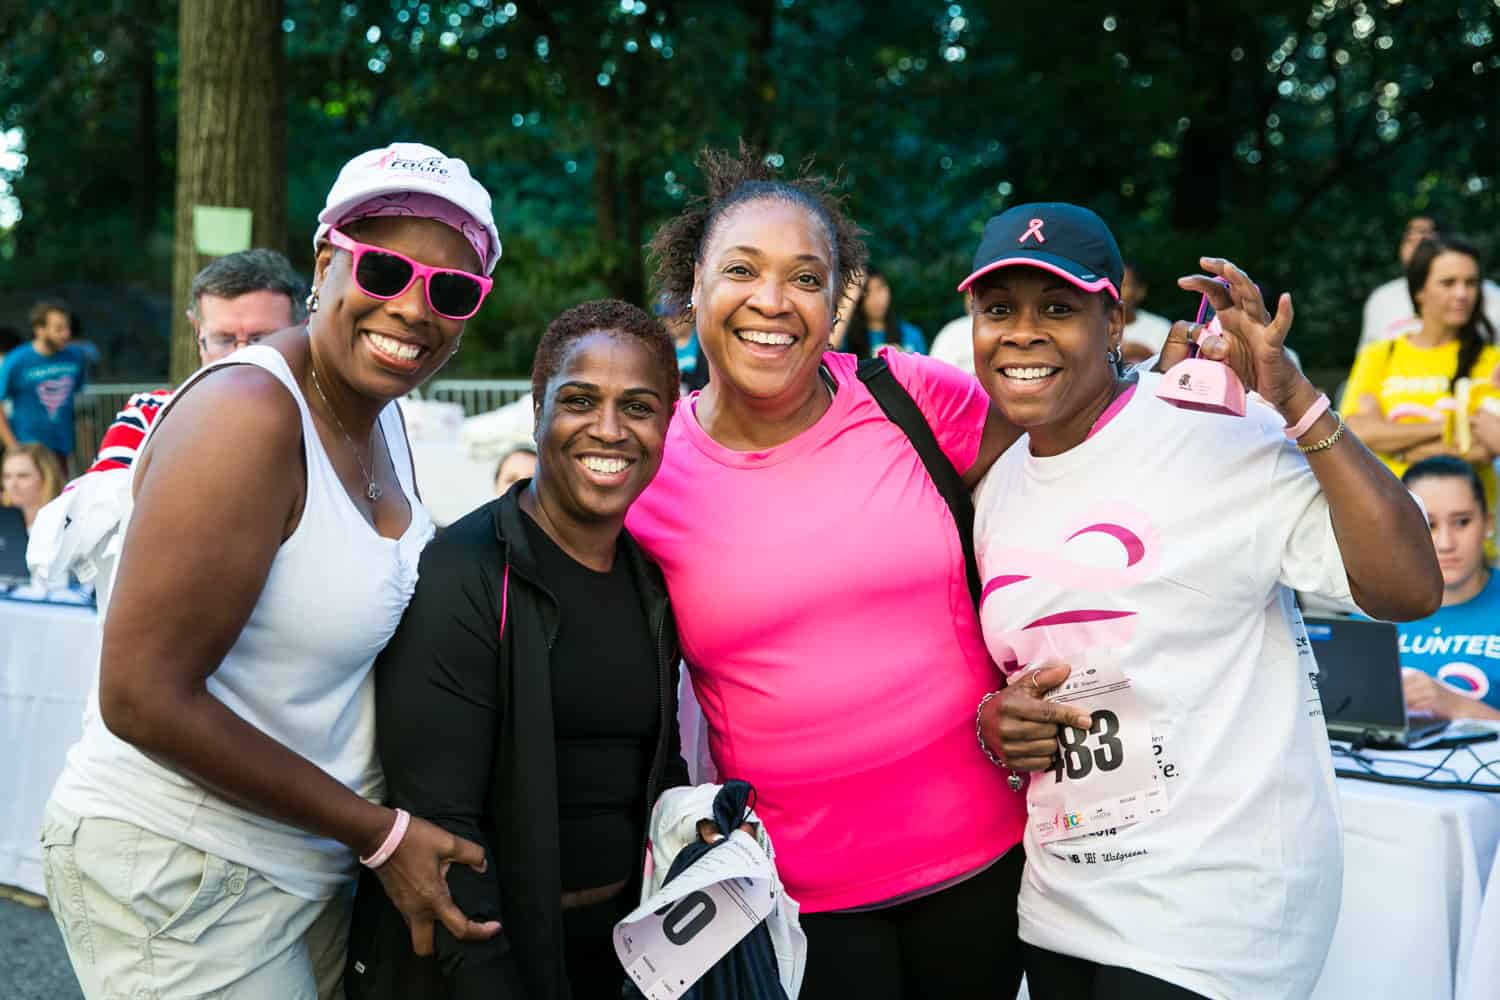 NYC Race for the Cure photos of group of African American female runners